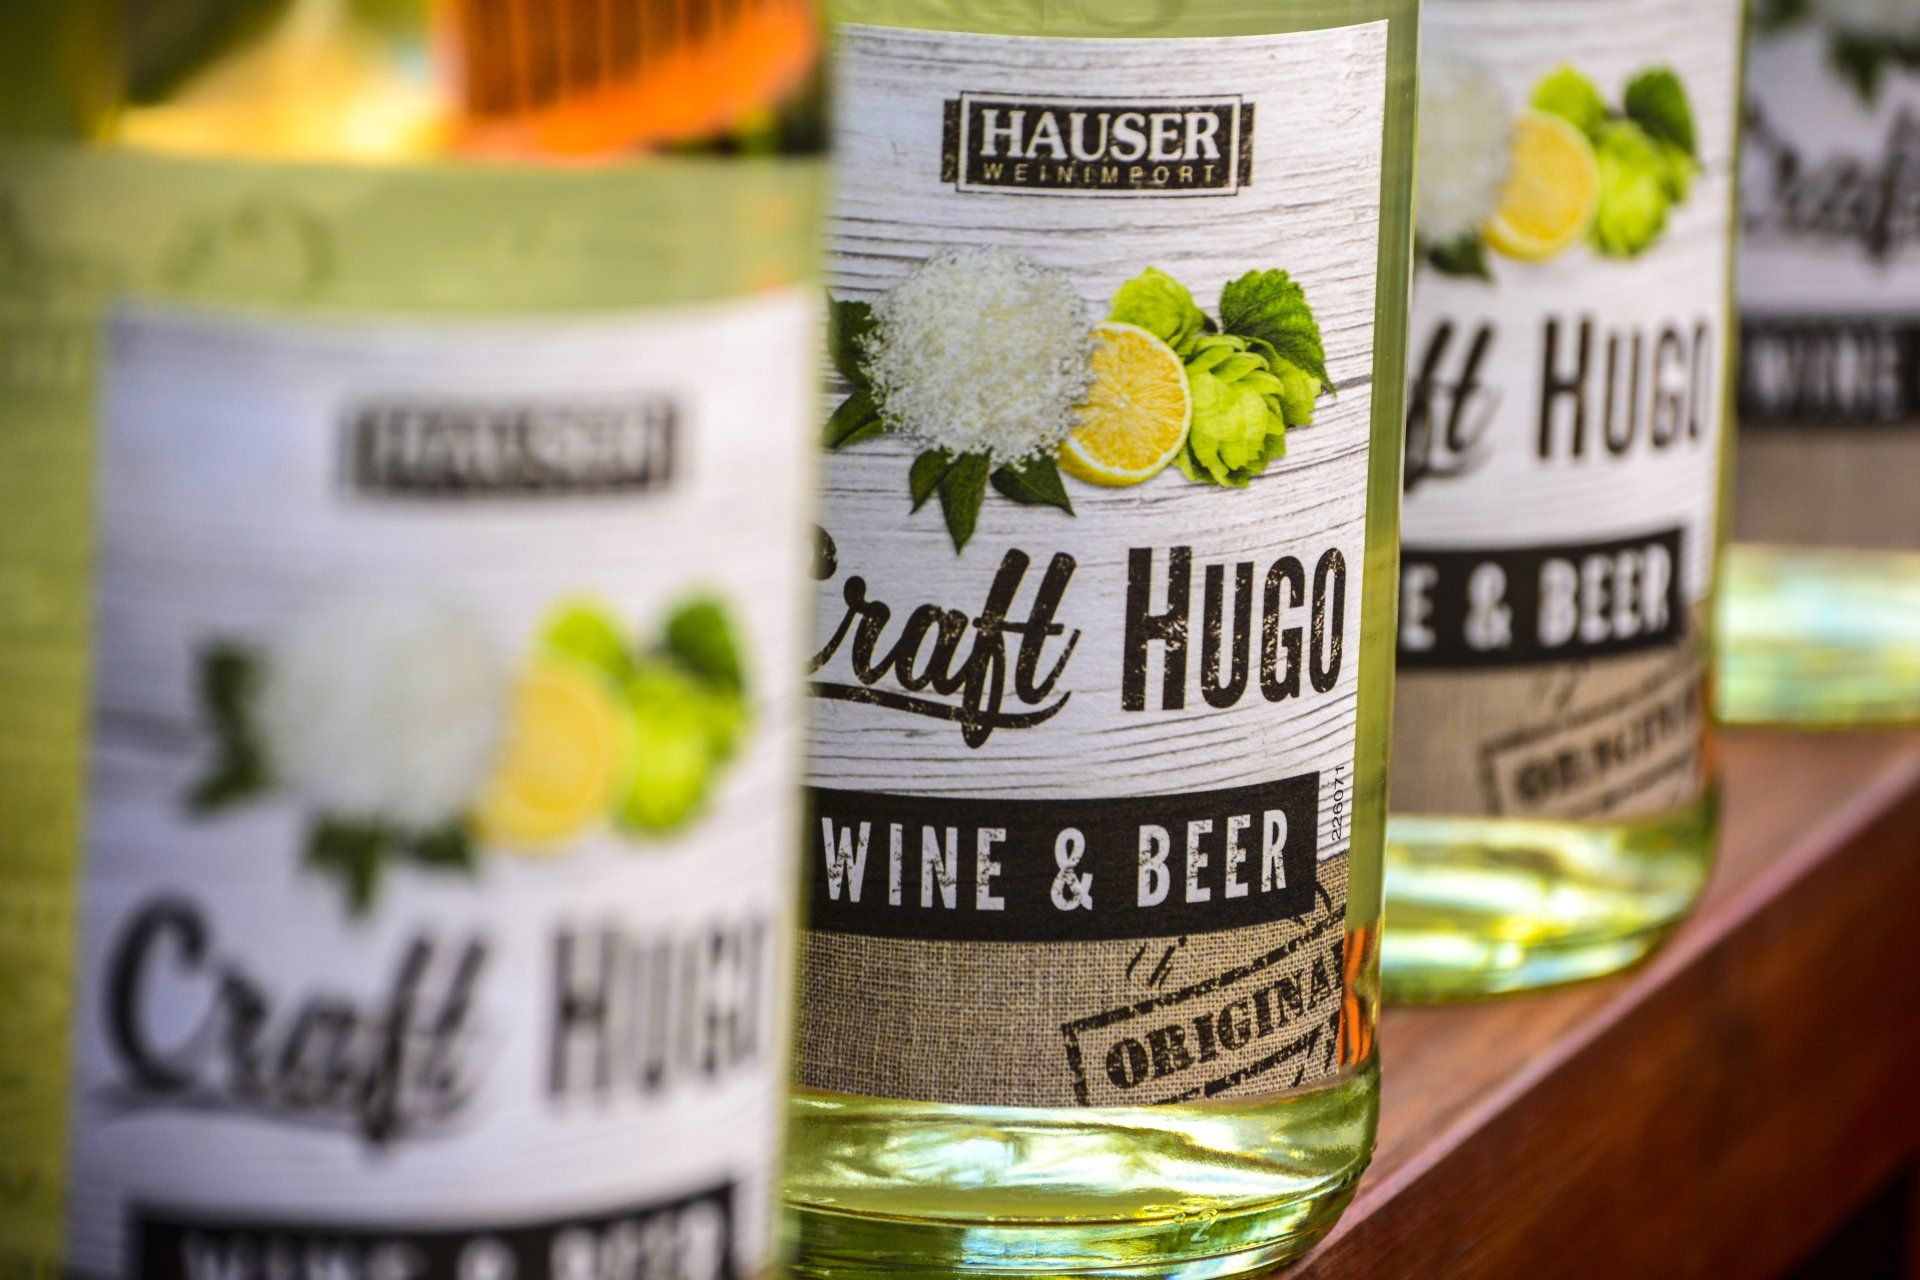 Three bottles of craft hugo wine and beer are lined up on a wooden shelf.